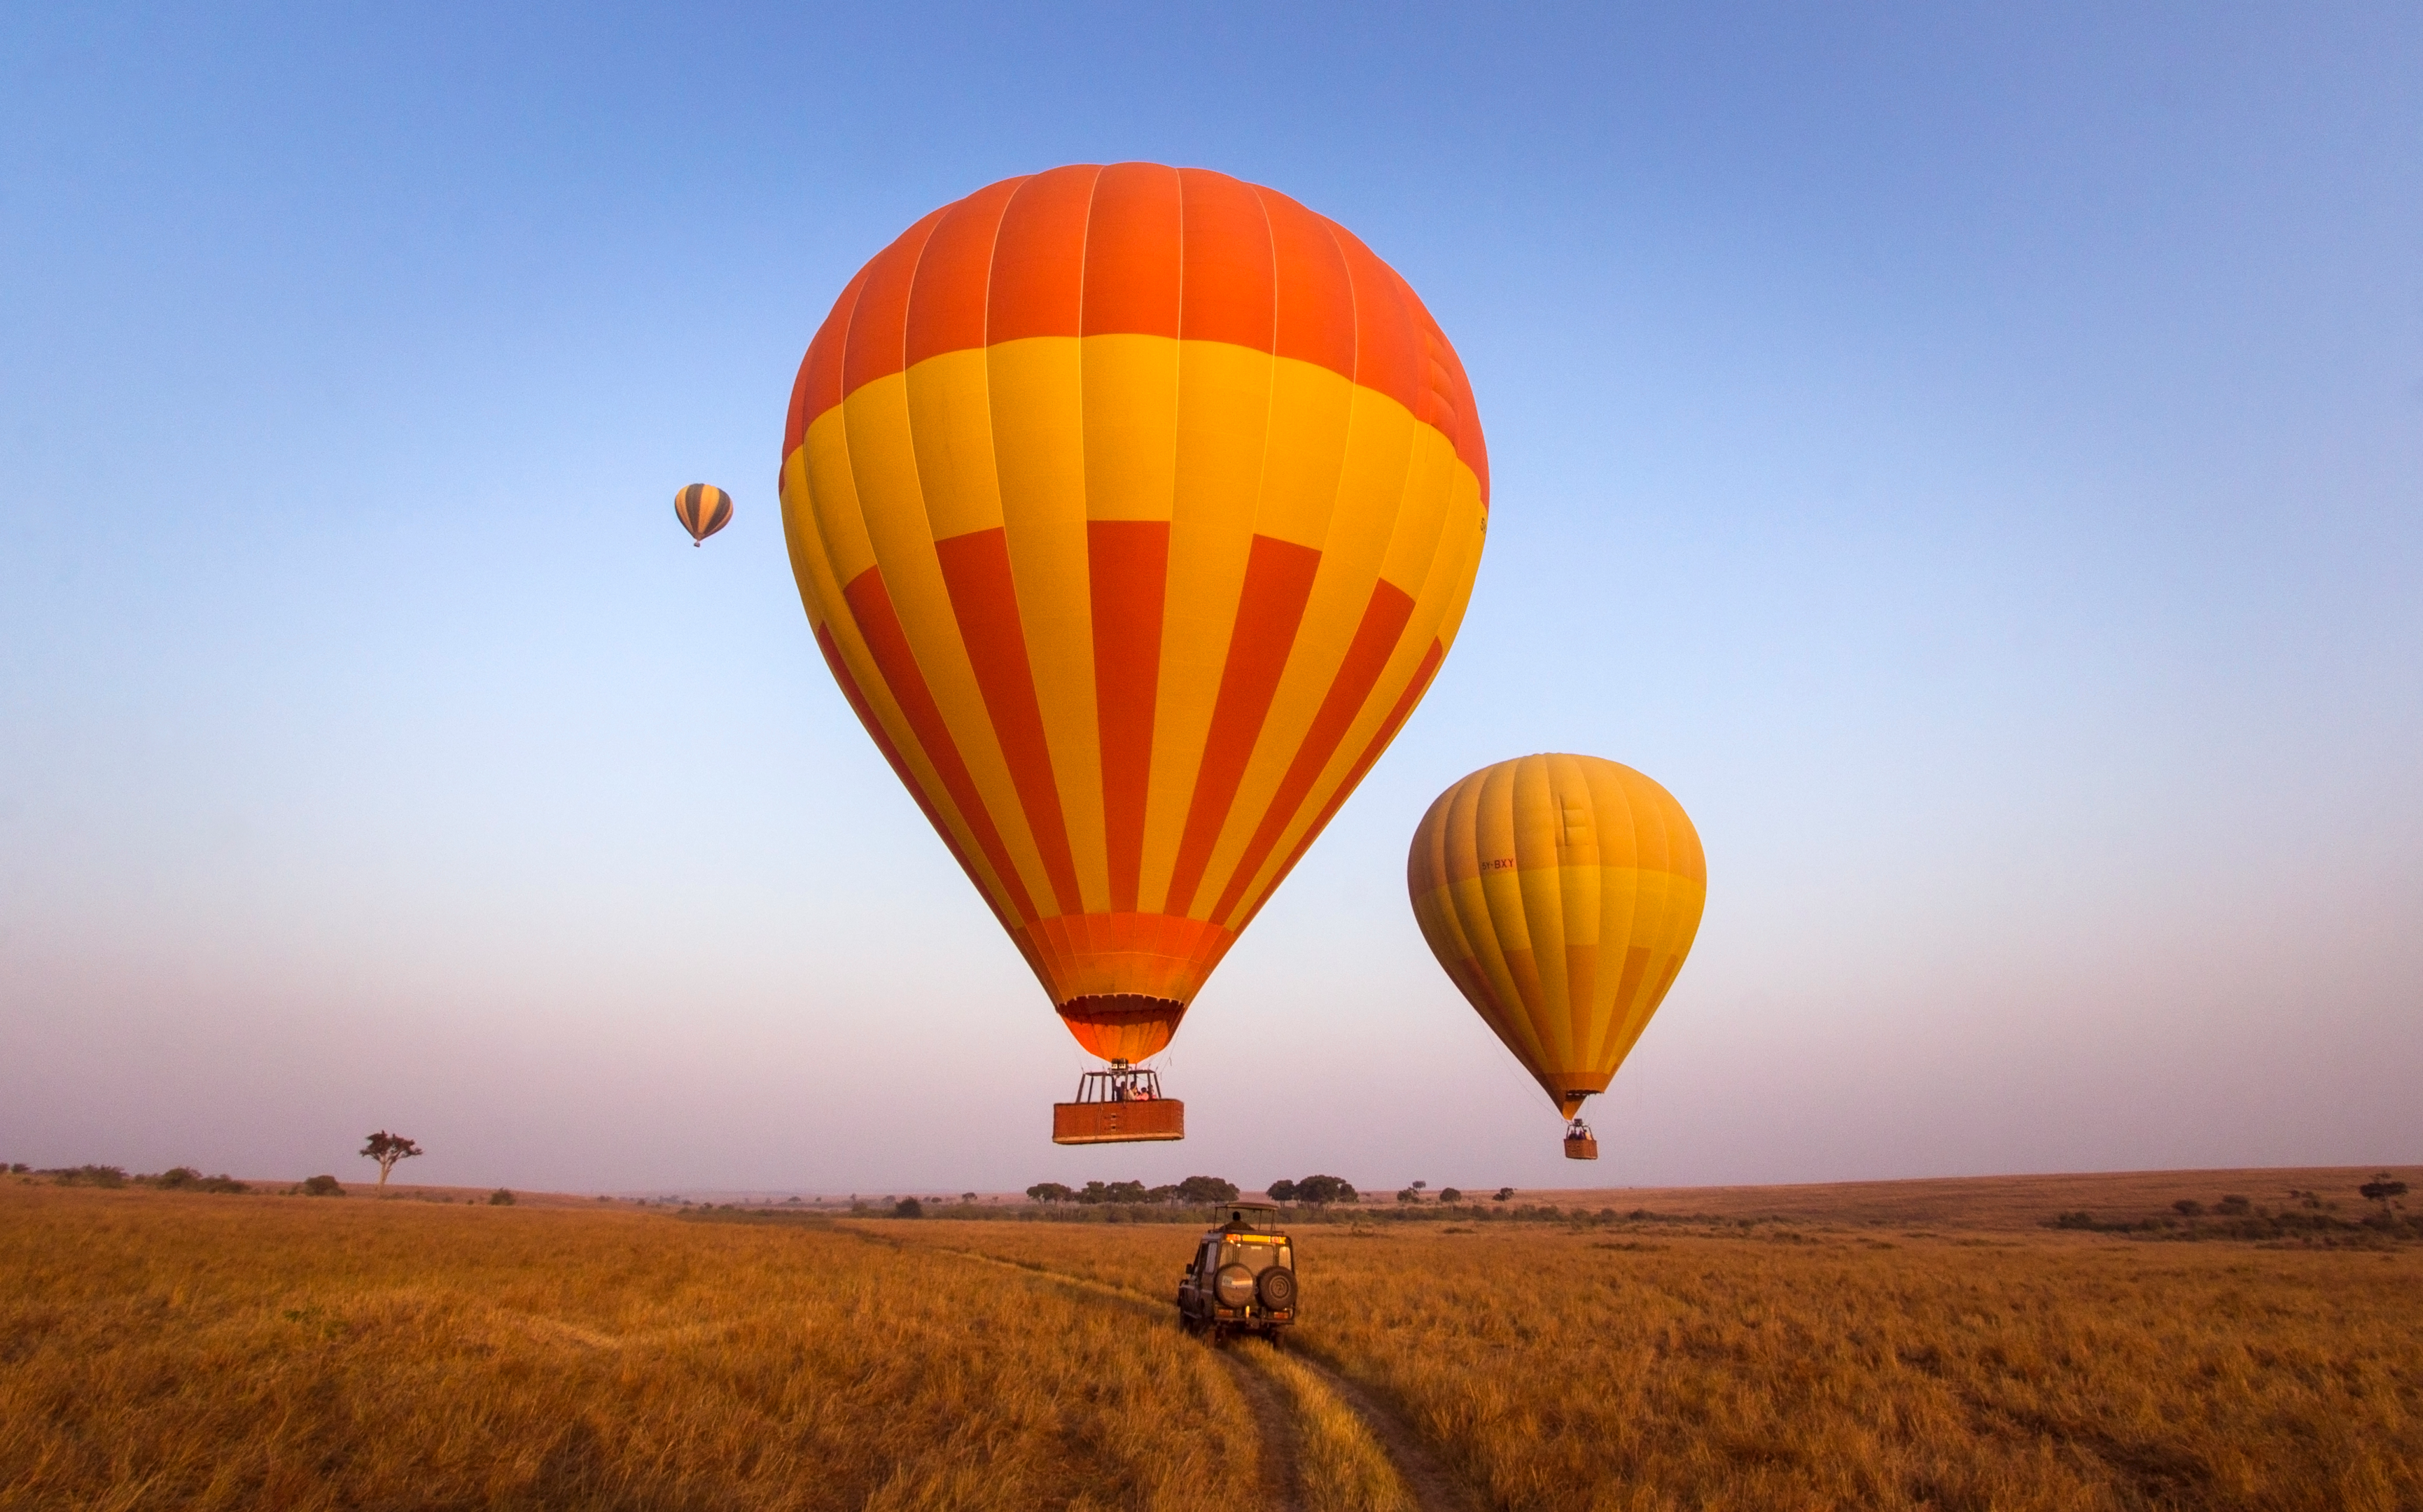 Hot air balloons over a grass field and a car